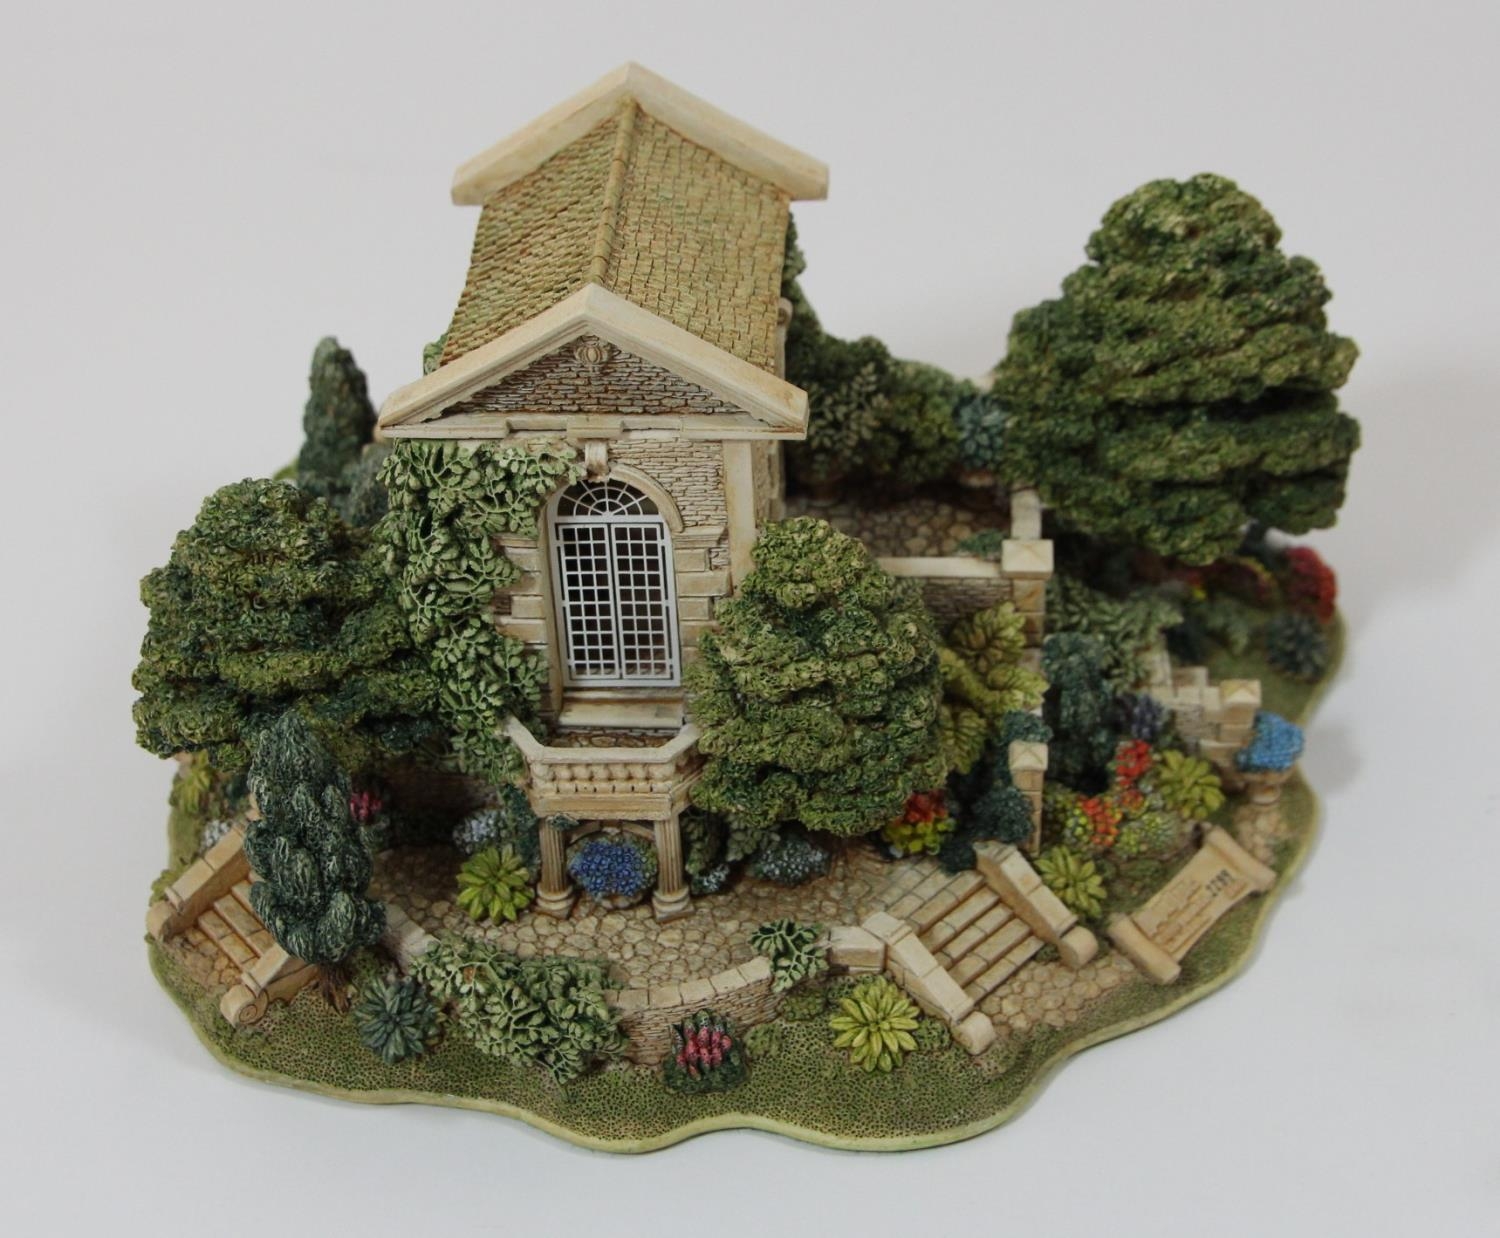 Lilliput Lane - Ltd Edition model 'Rags To Riches' together with a ltd edition model 'Hestercombe - Image 7 of 12